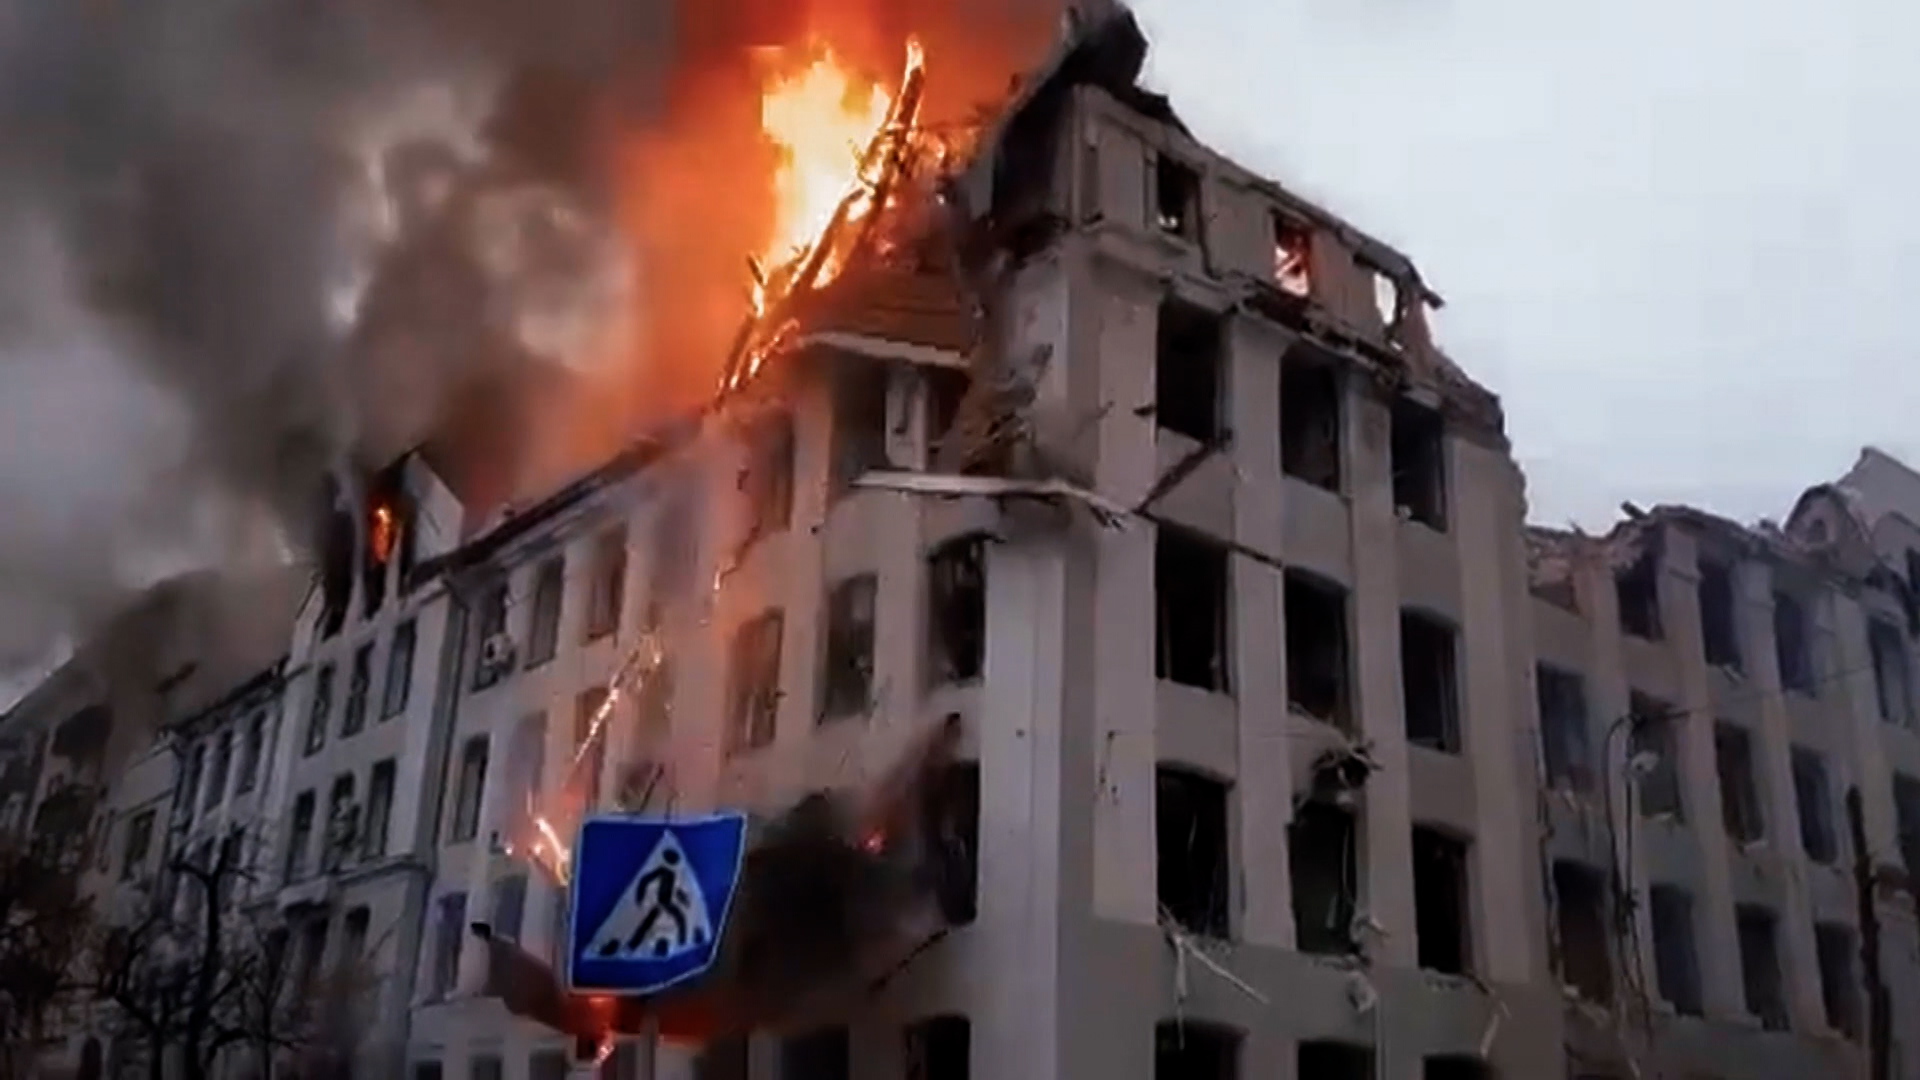 A building in Ukraine has been struck with artillery and the roof has been set on fire.